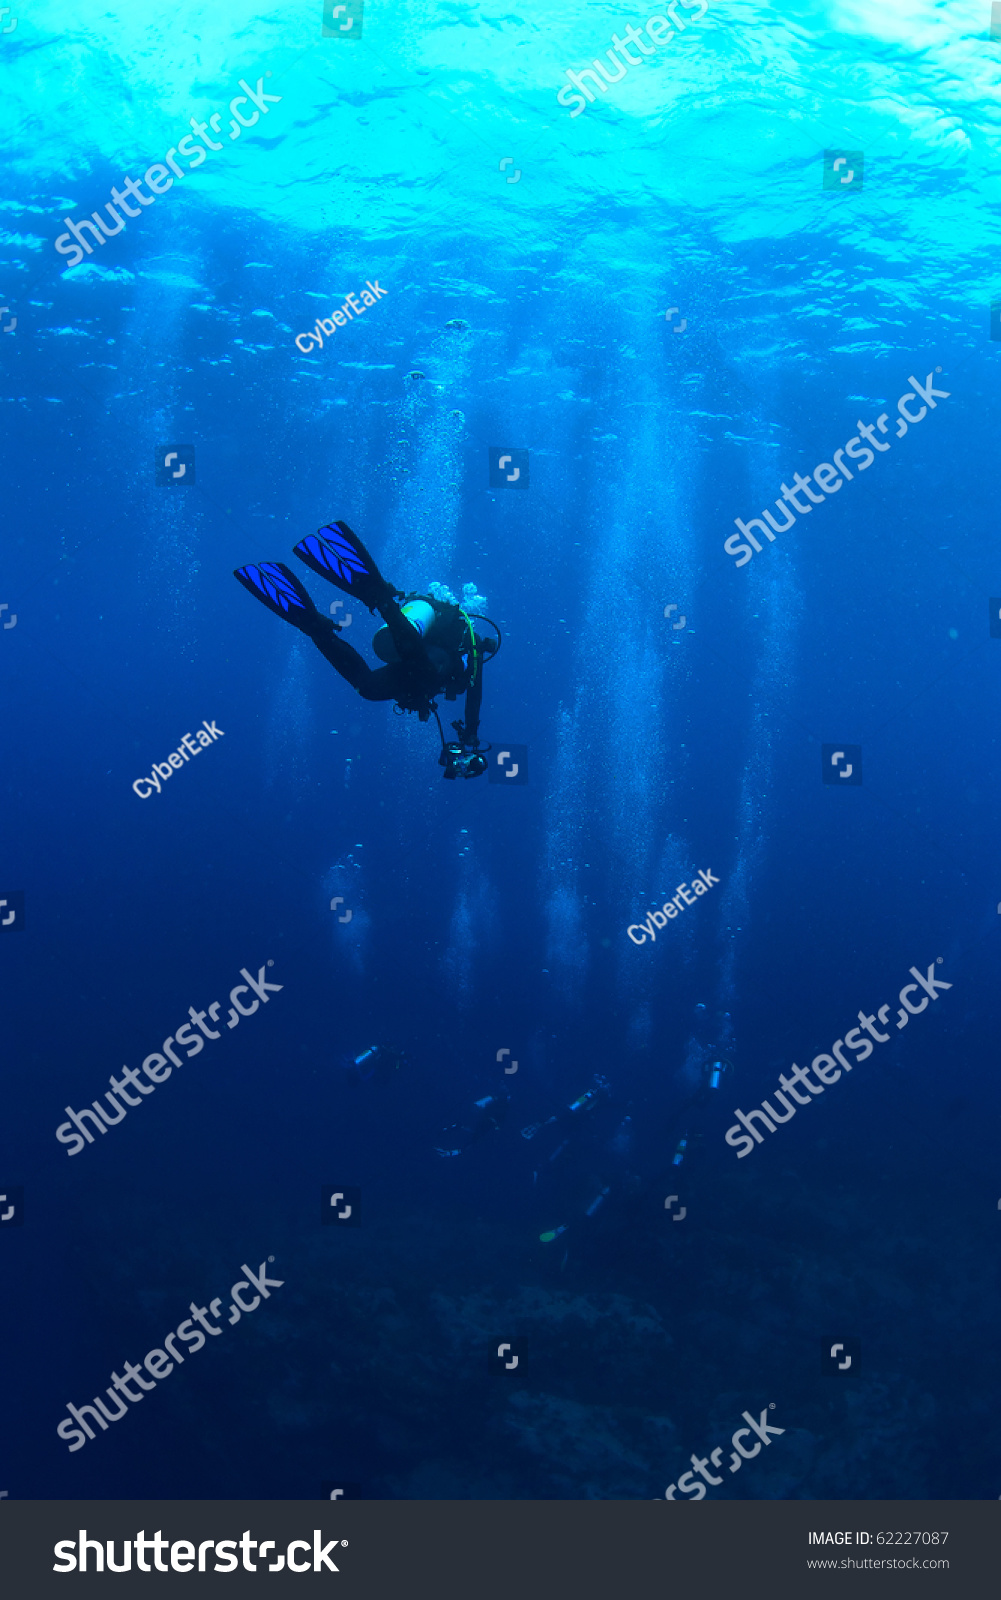 A photographer diver lost his group #62227087